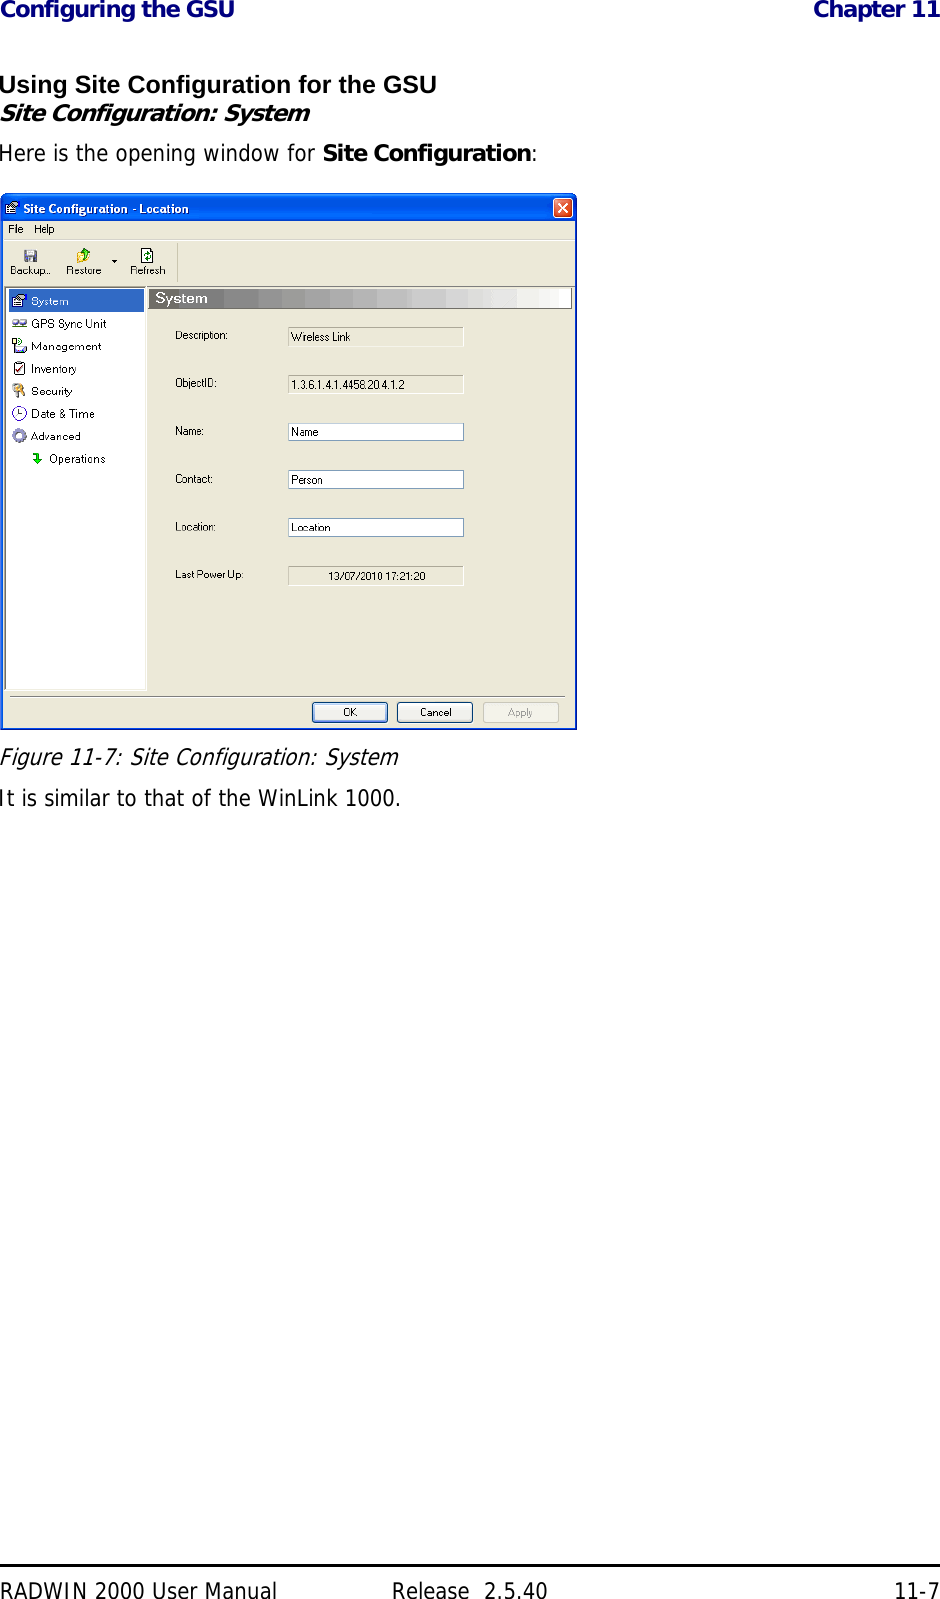 Configuring the GSU Chapter 11RADWIN 2000 User Manual Release  2.5.40 11-7Using Site Configuration for the GSUSite Configuration: SystemHere is the opening window for Site Configuration:Figure 11-7: Site Configuration: SystemIt is similar to that of the WinLink 1000.